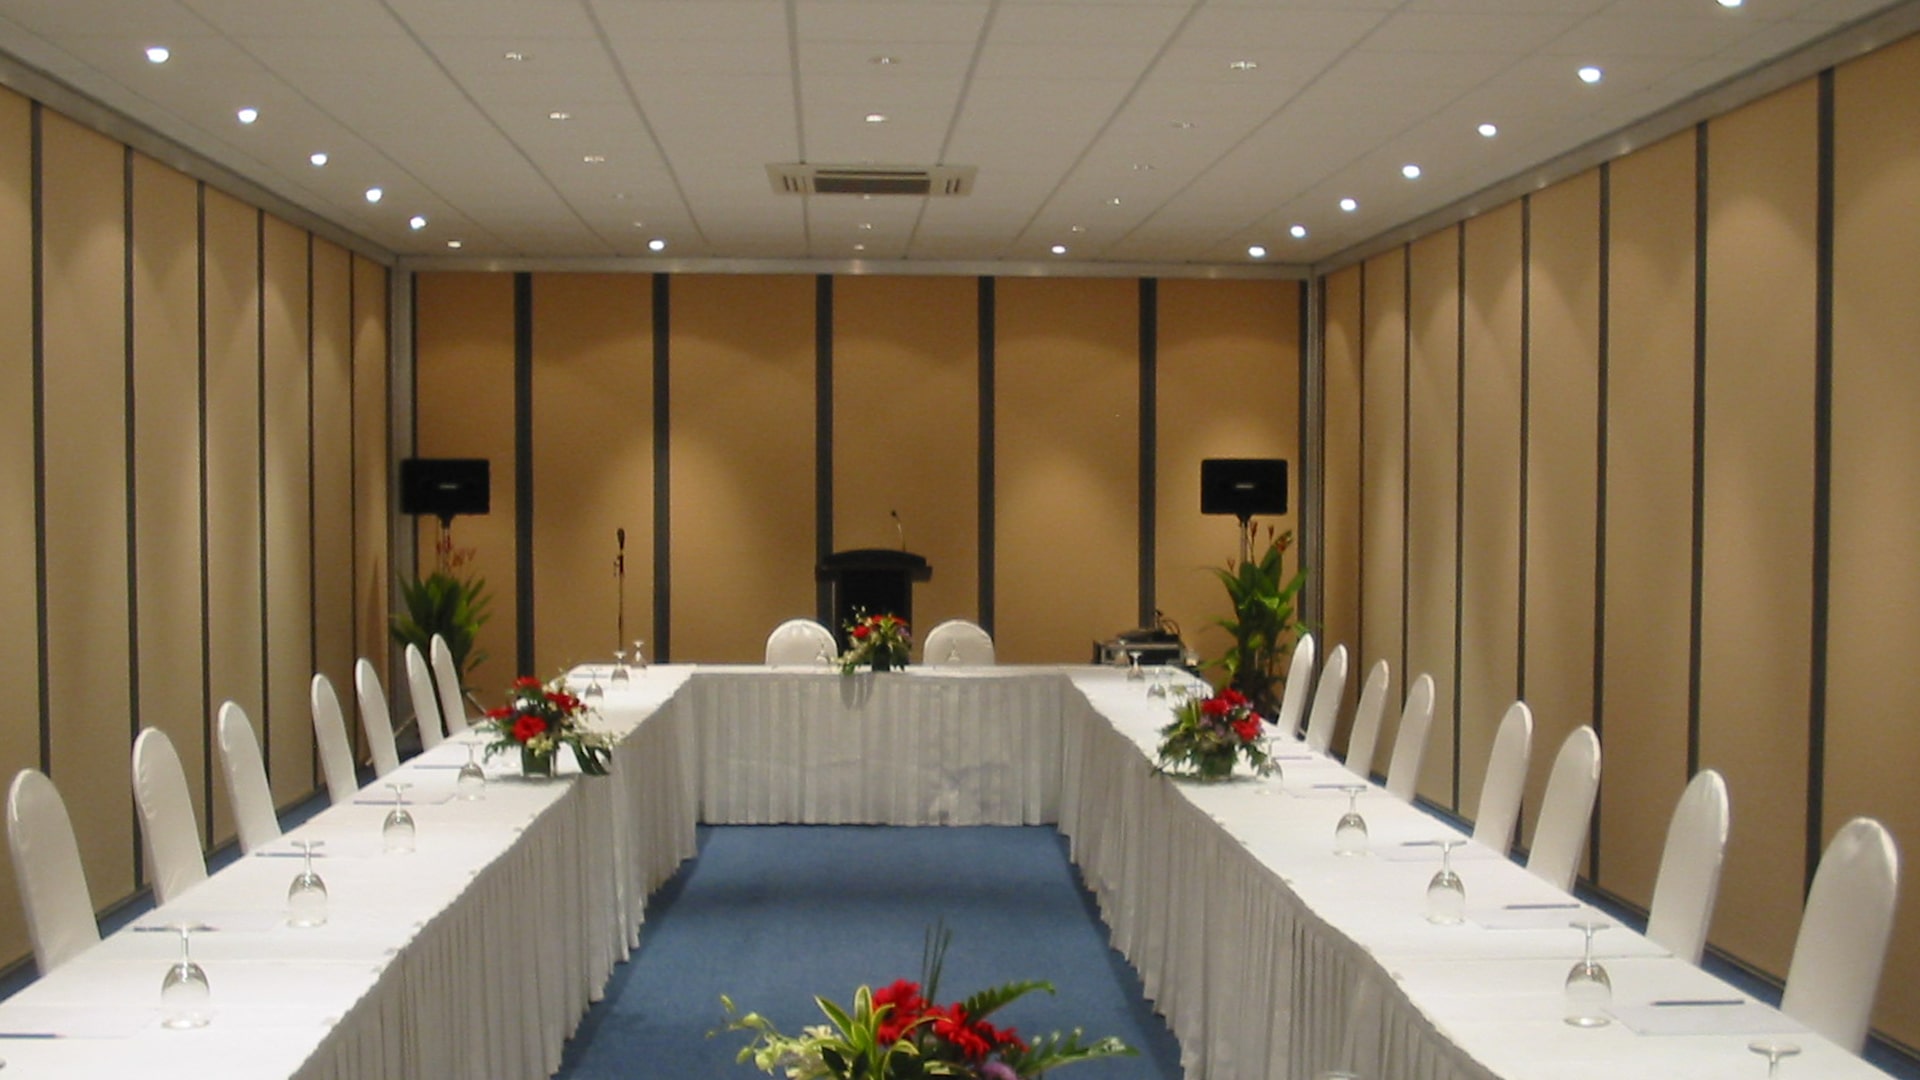 tsc_opt-images_tubelar-system_singapore-expo-expandable-meeting-rooms-1920x1080-02-min